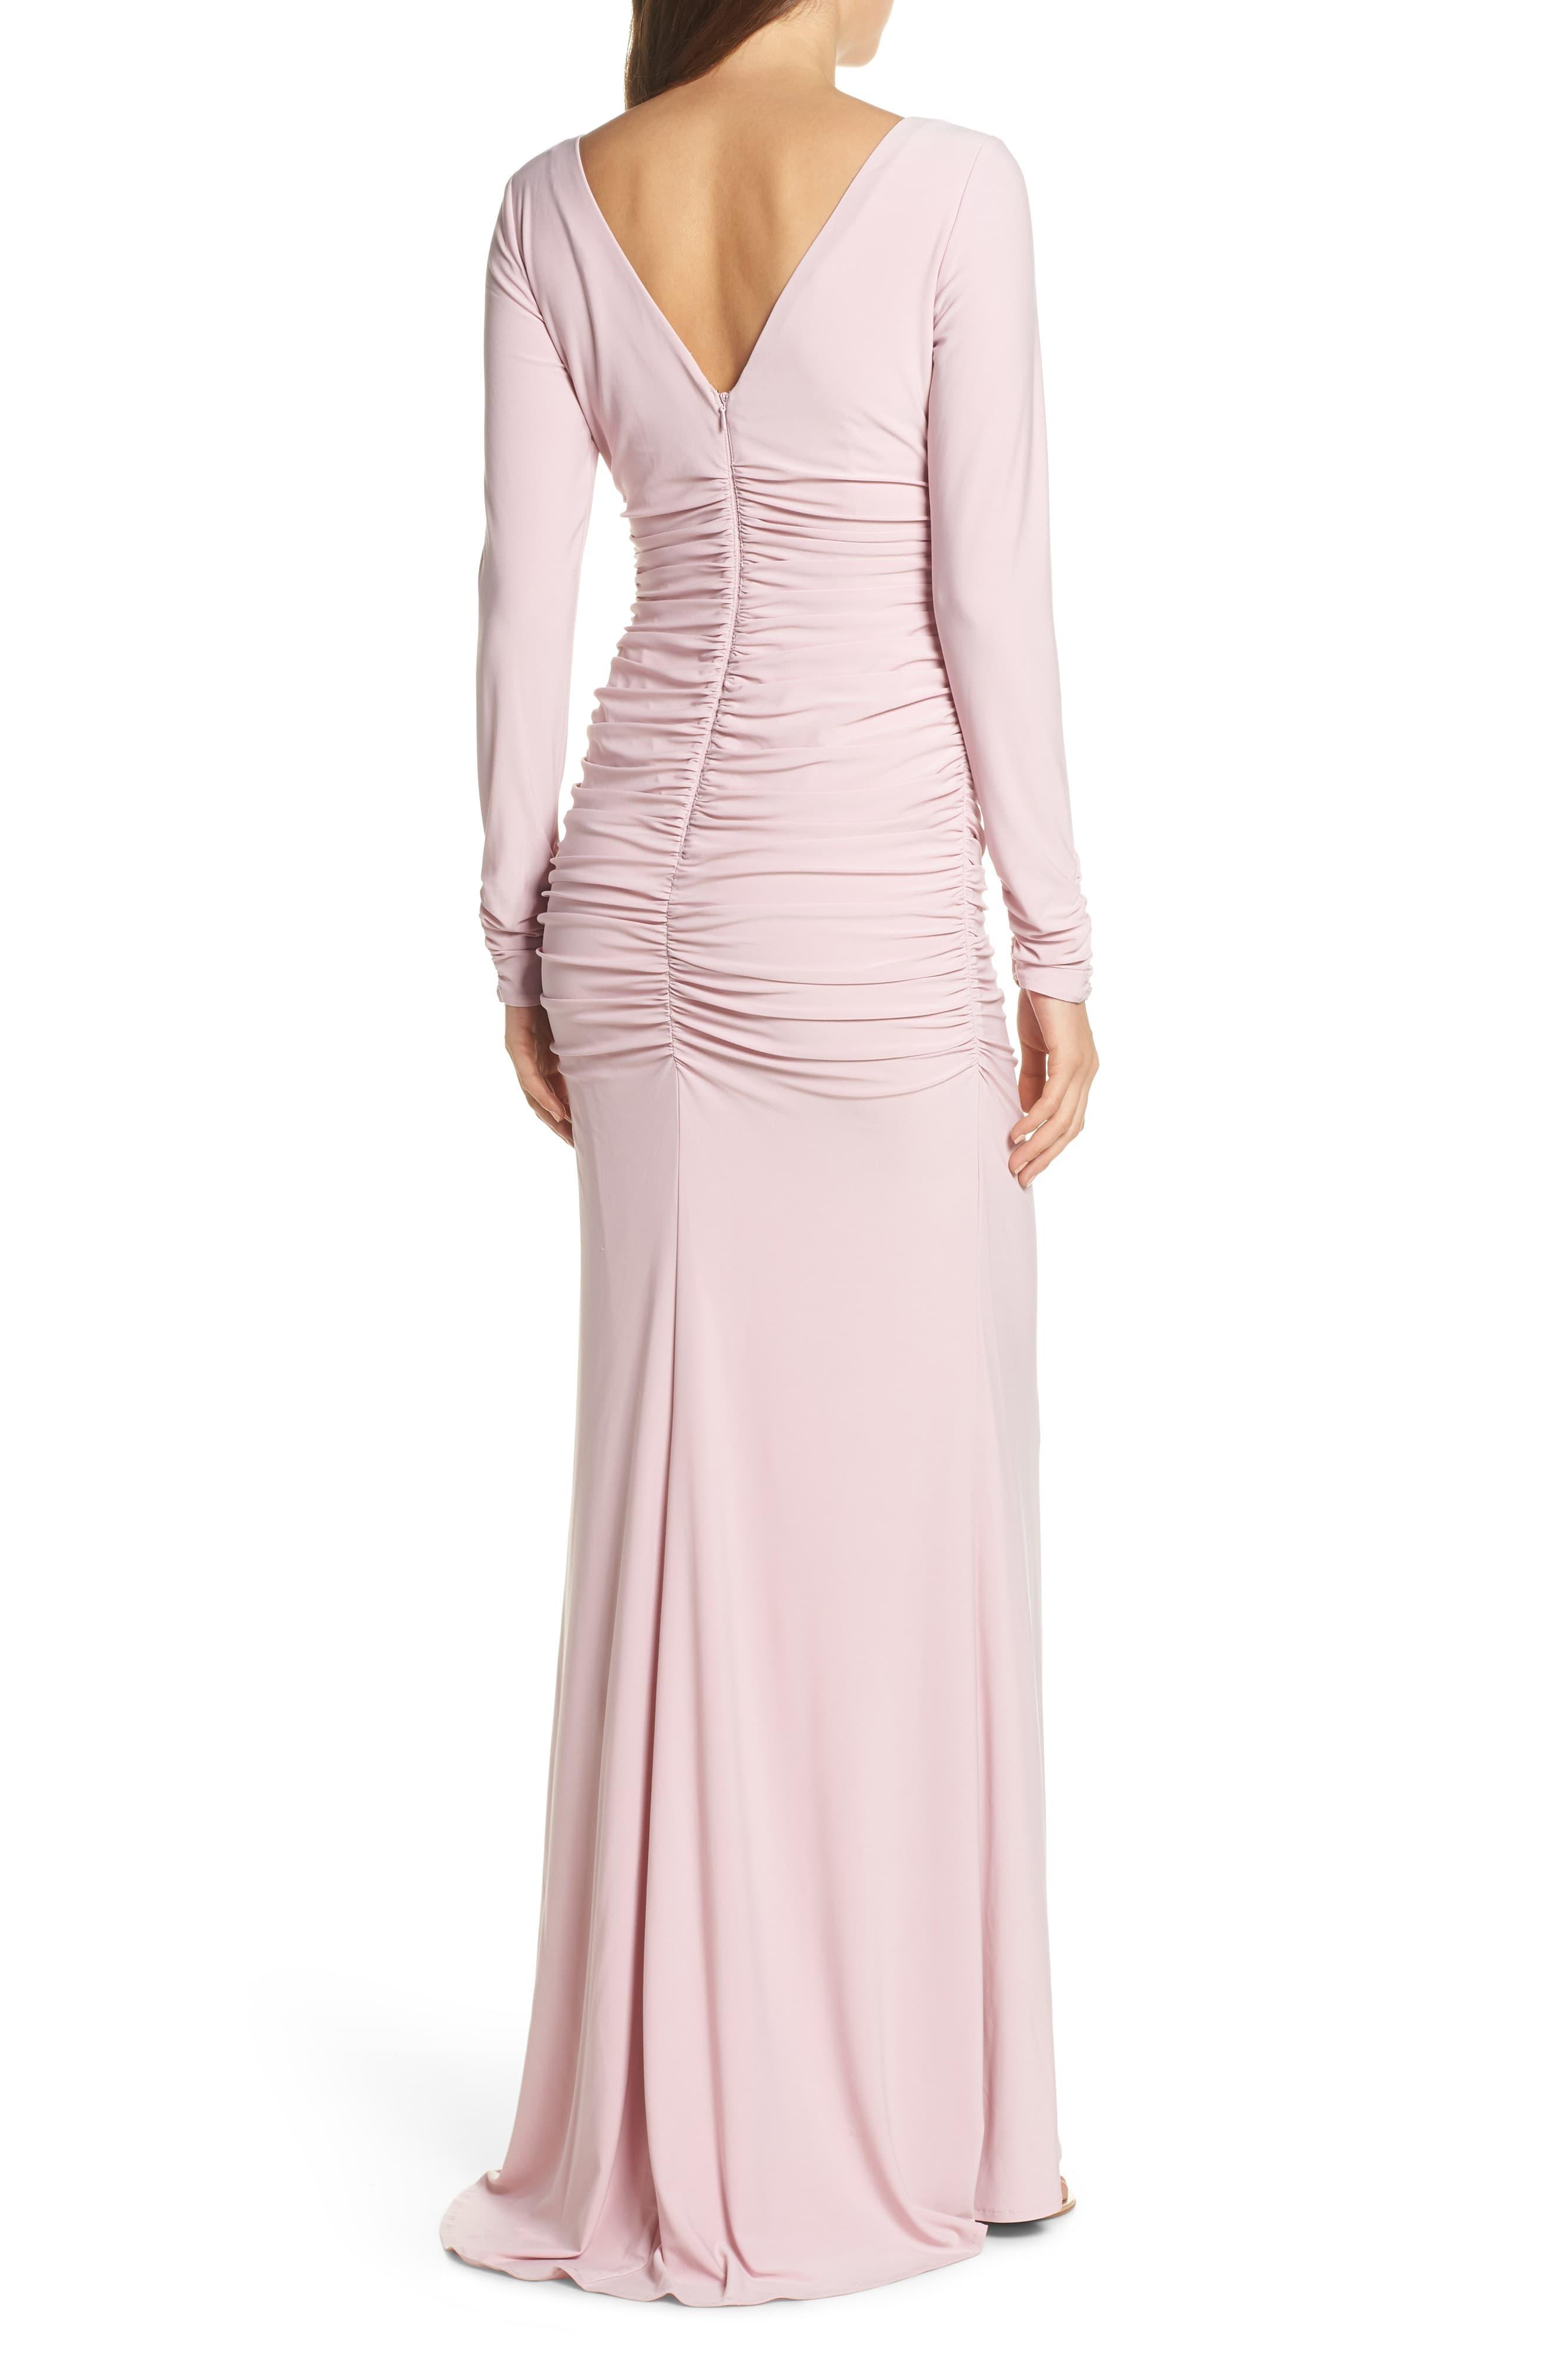 Ruched Evening Dress Top Sellers, UP TO ...